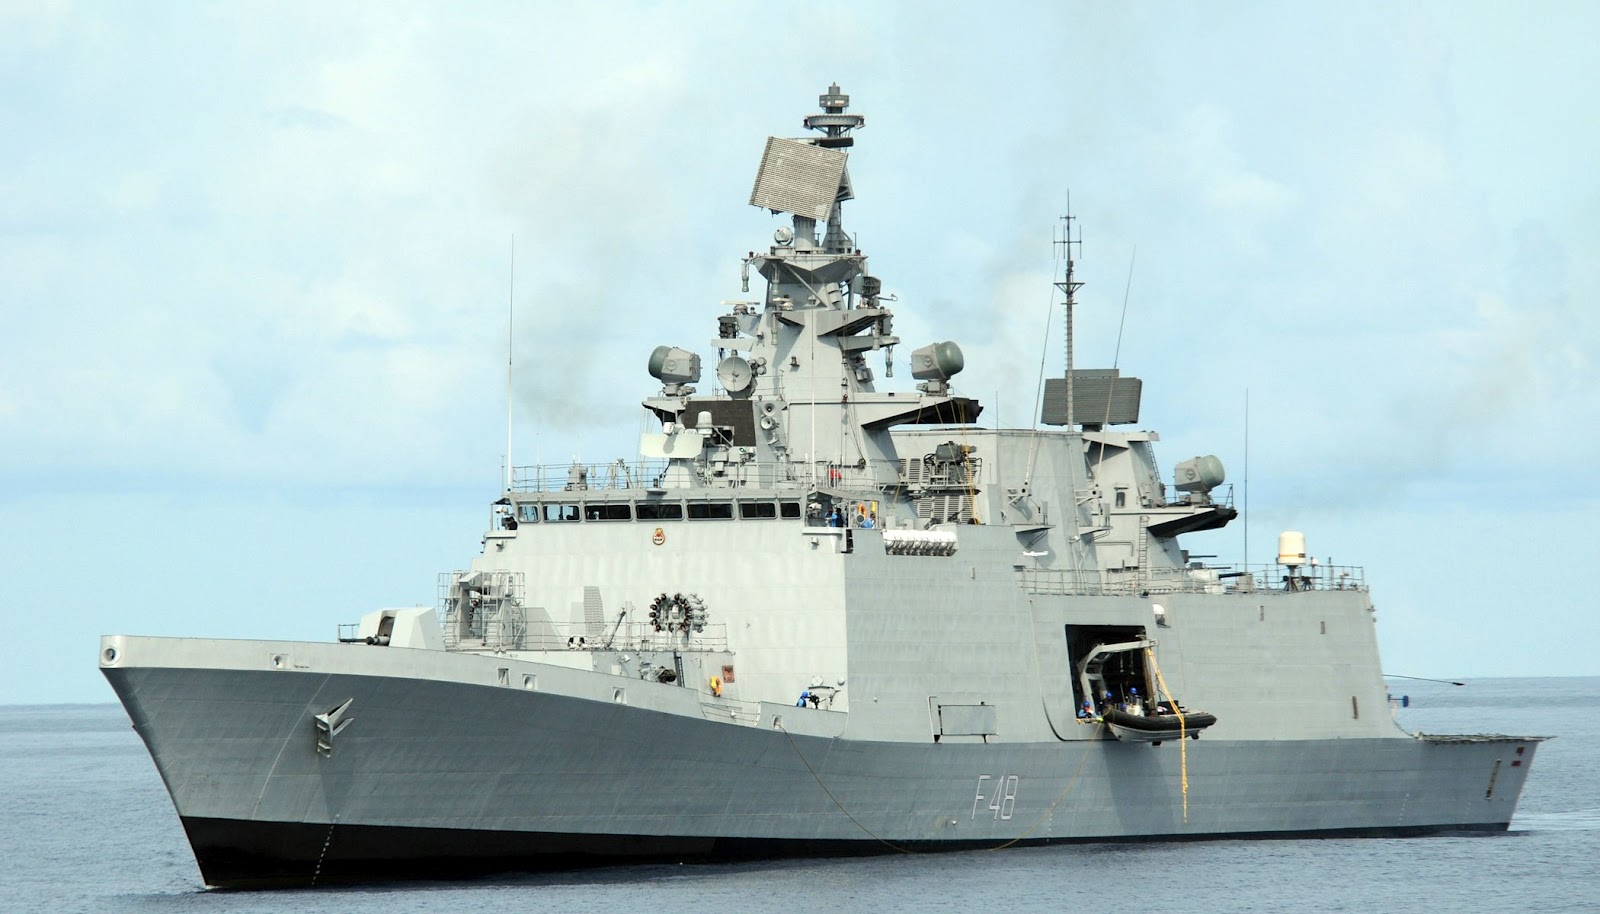 INS+Satpura+%2528F48%2529+Shivalik+class+frigates+or+Project+17+class+frigates+are+multi-role+frigates+with+stealth+features+being+built+for+the+Indian+Navy+%25283%2529.jpg